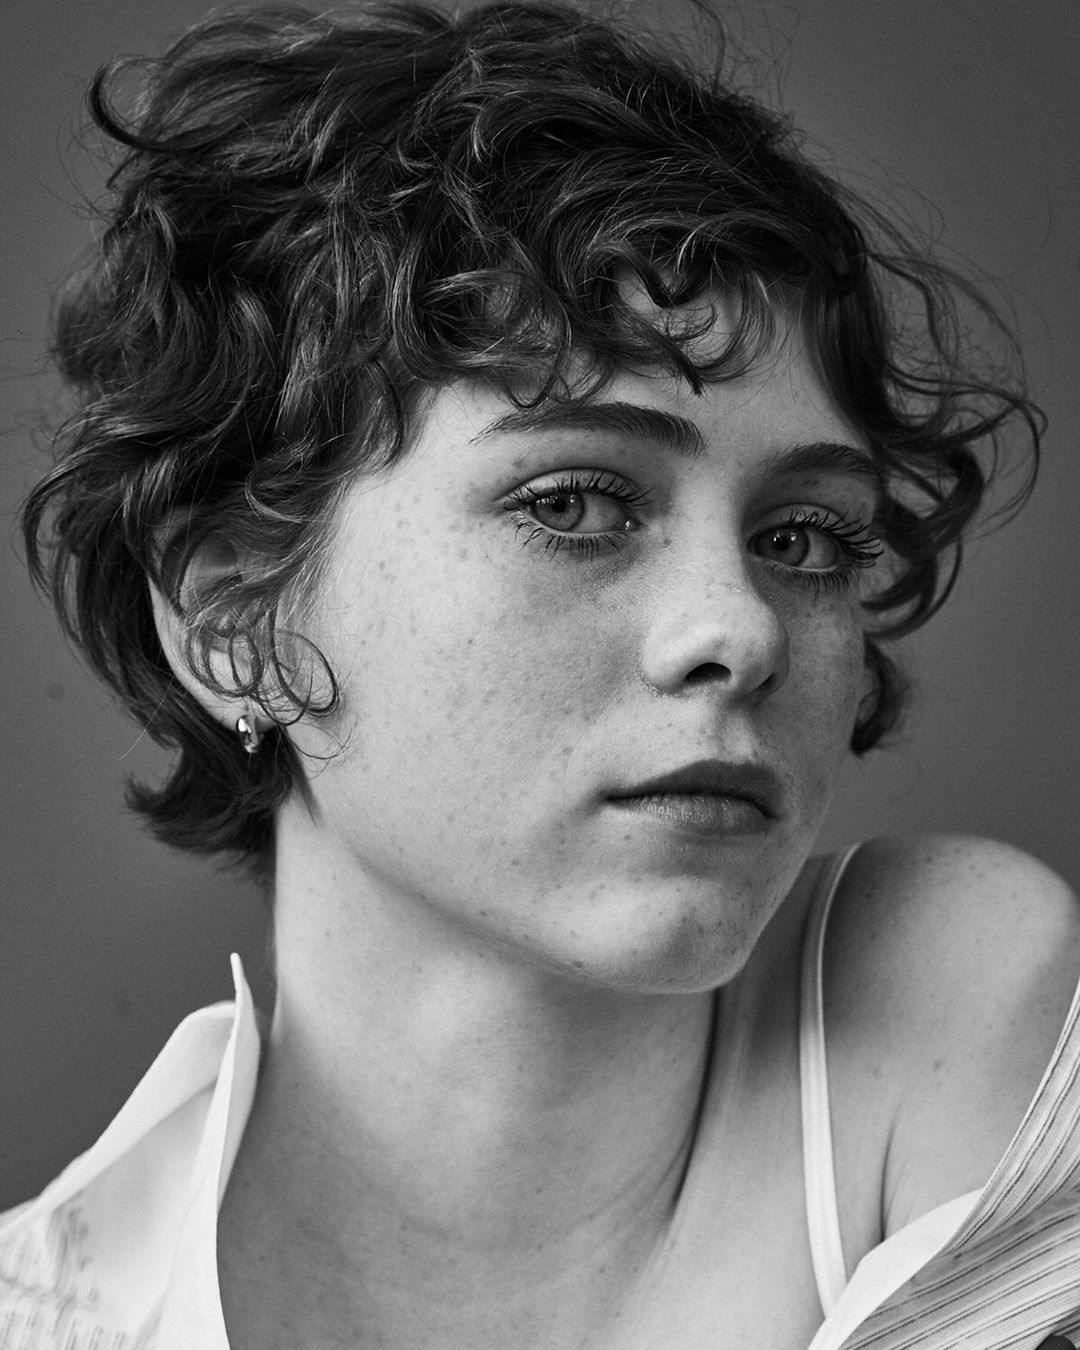 Sophia Lillis was one of the main cast members in horror movie It.